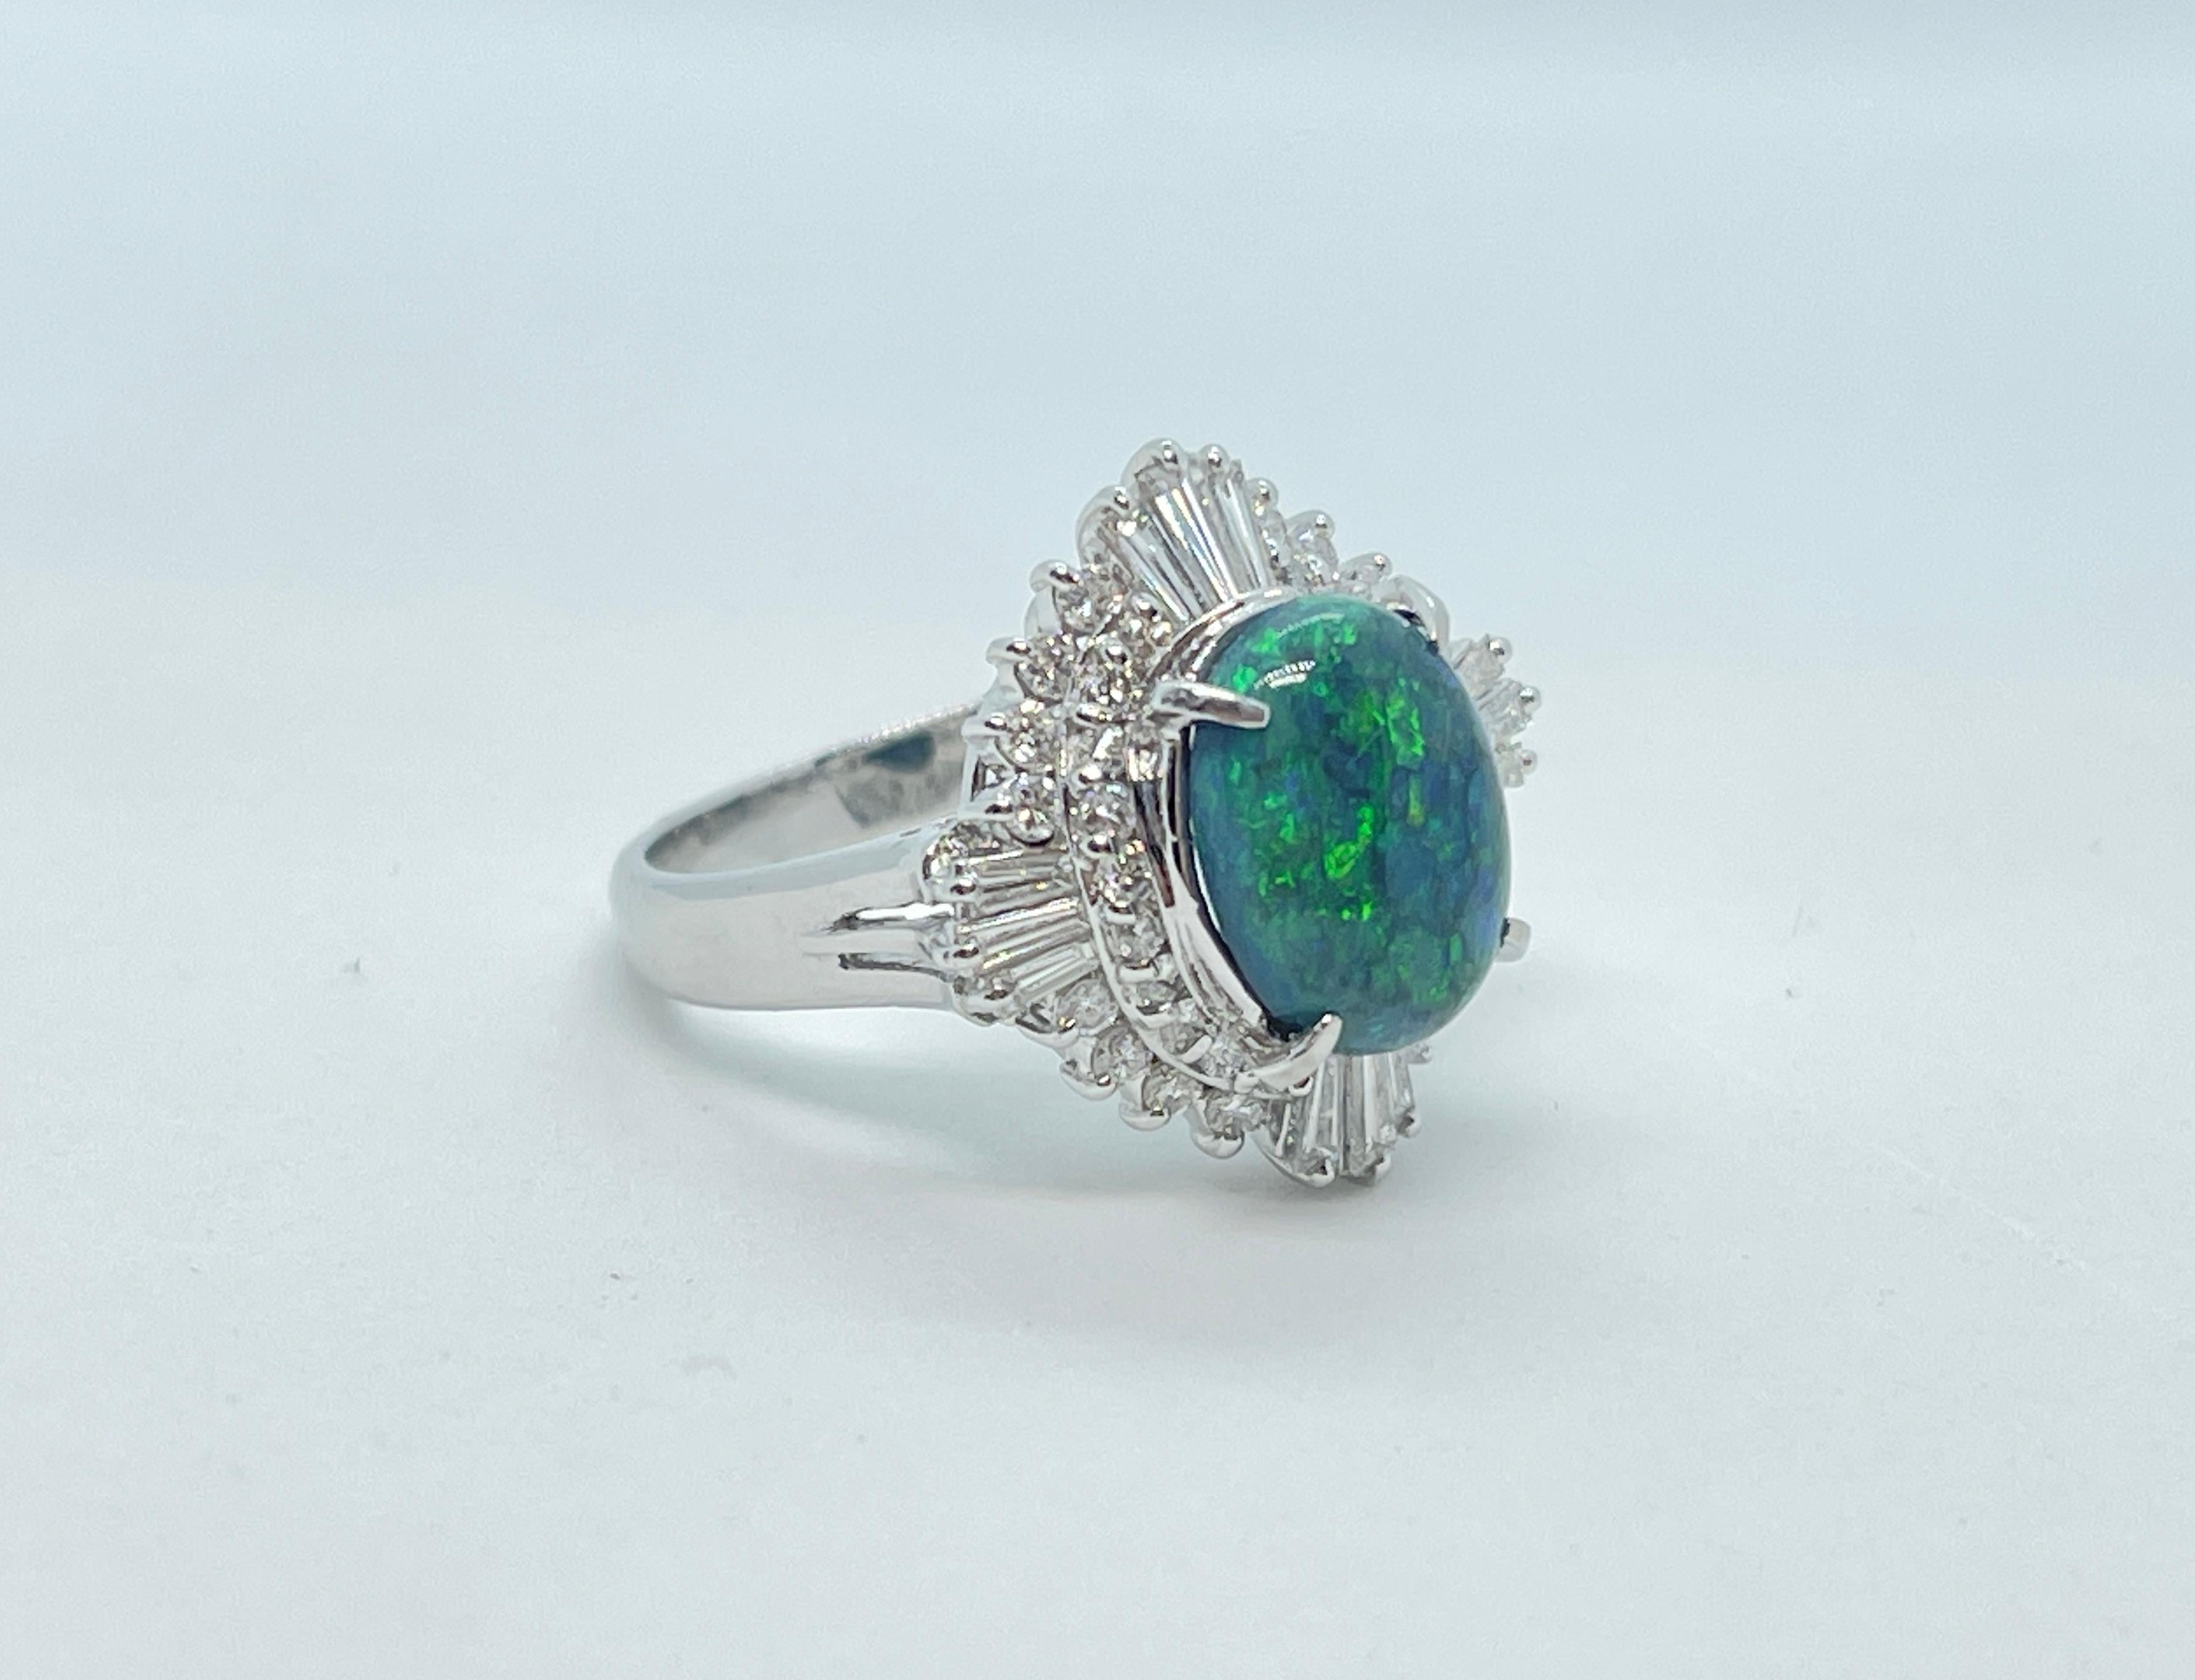 This amazing ring features a Precious Opal that was mined in Australia.
The 2.08ct solid Black Opal displays play of colour in hues of blue and green. 
The setting is solid Platinum and there are 36 x Diamonds surrounding the Opal in a Ballerina